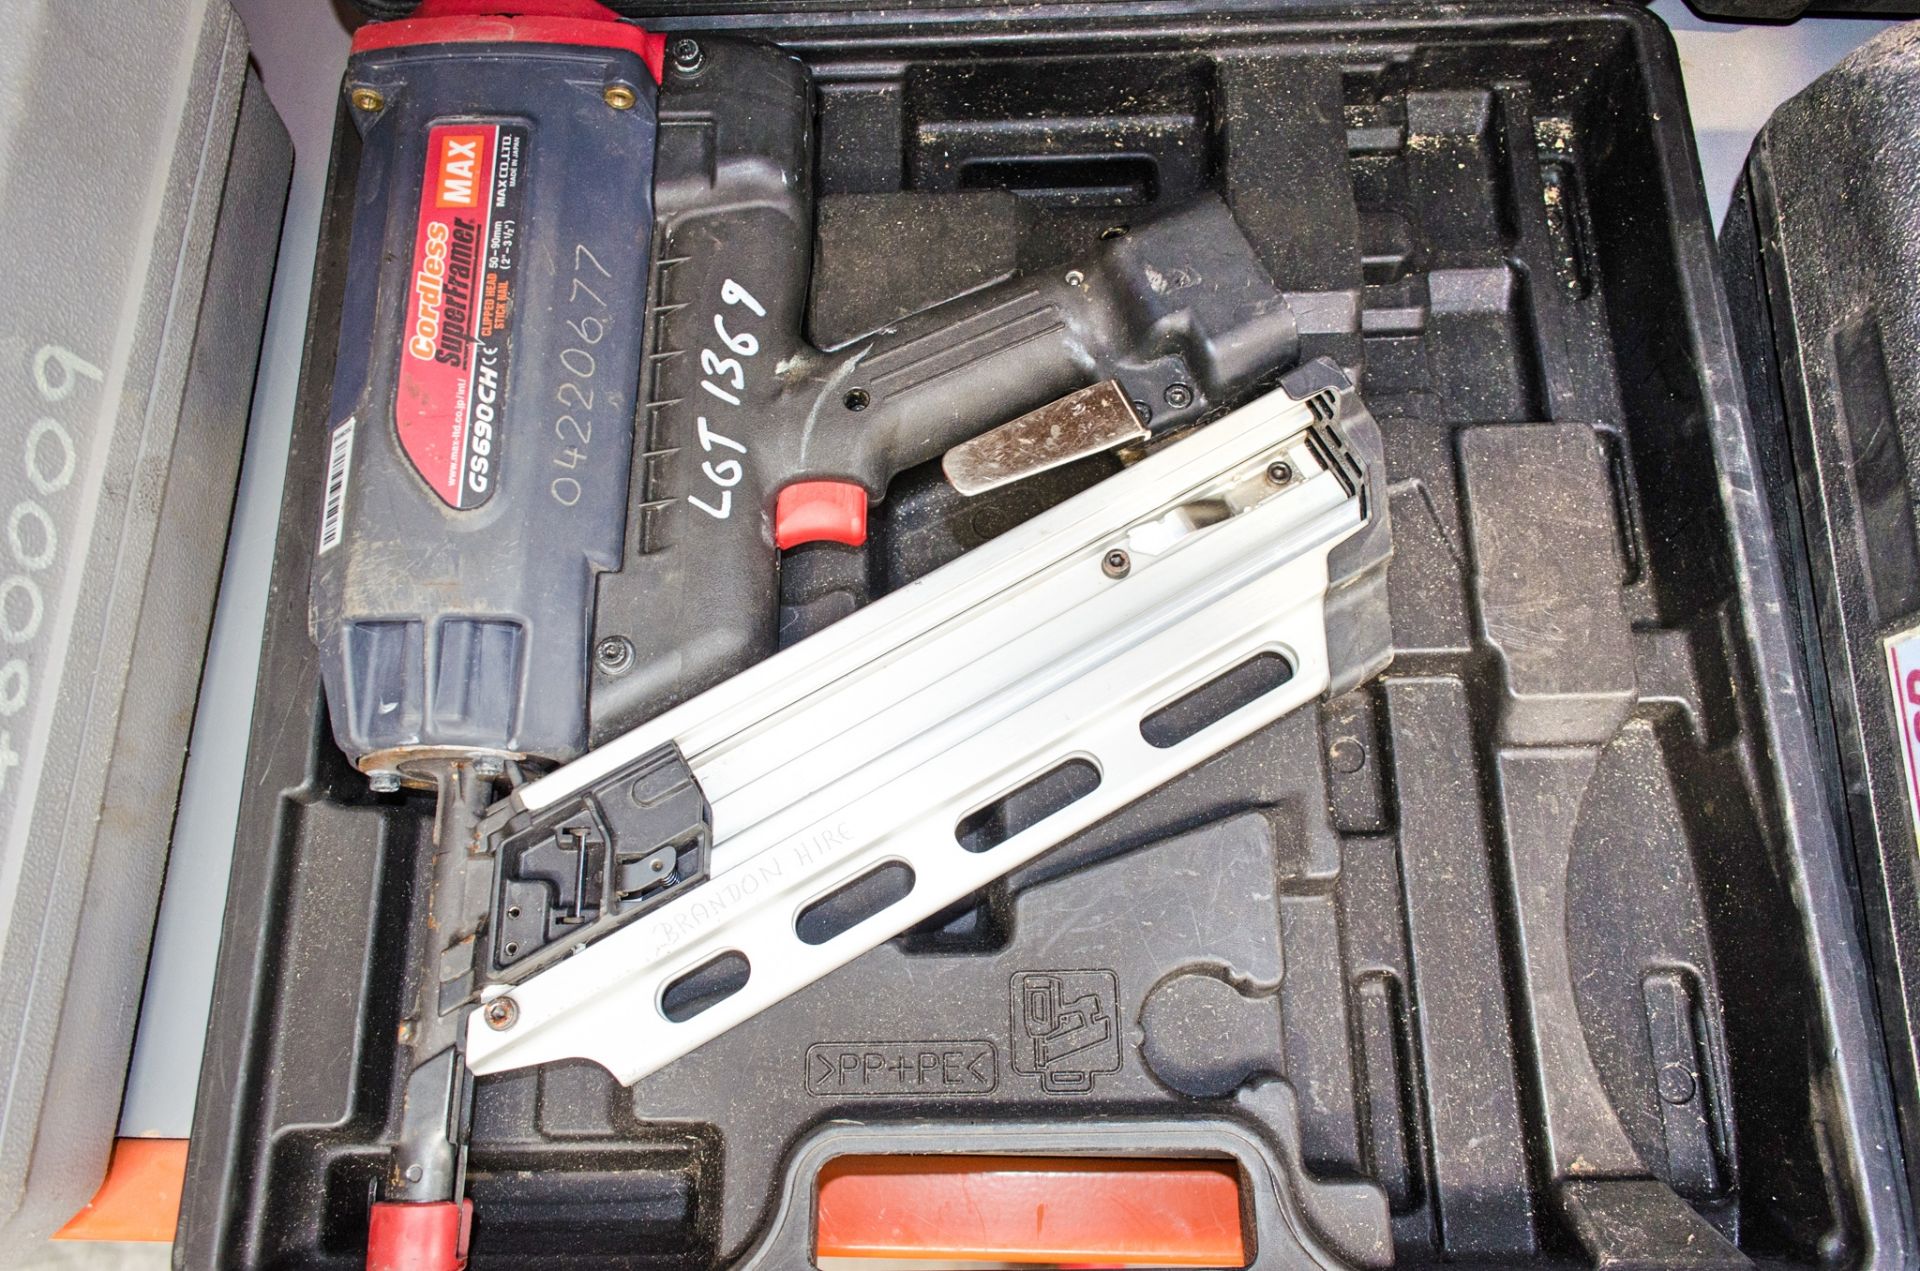 Max GS690CH cordless nail gun c/w carry case ** No charger or batteries **